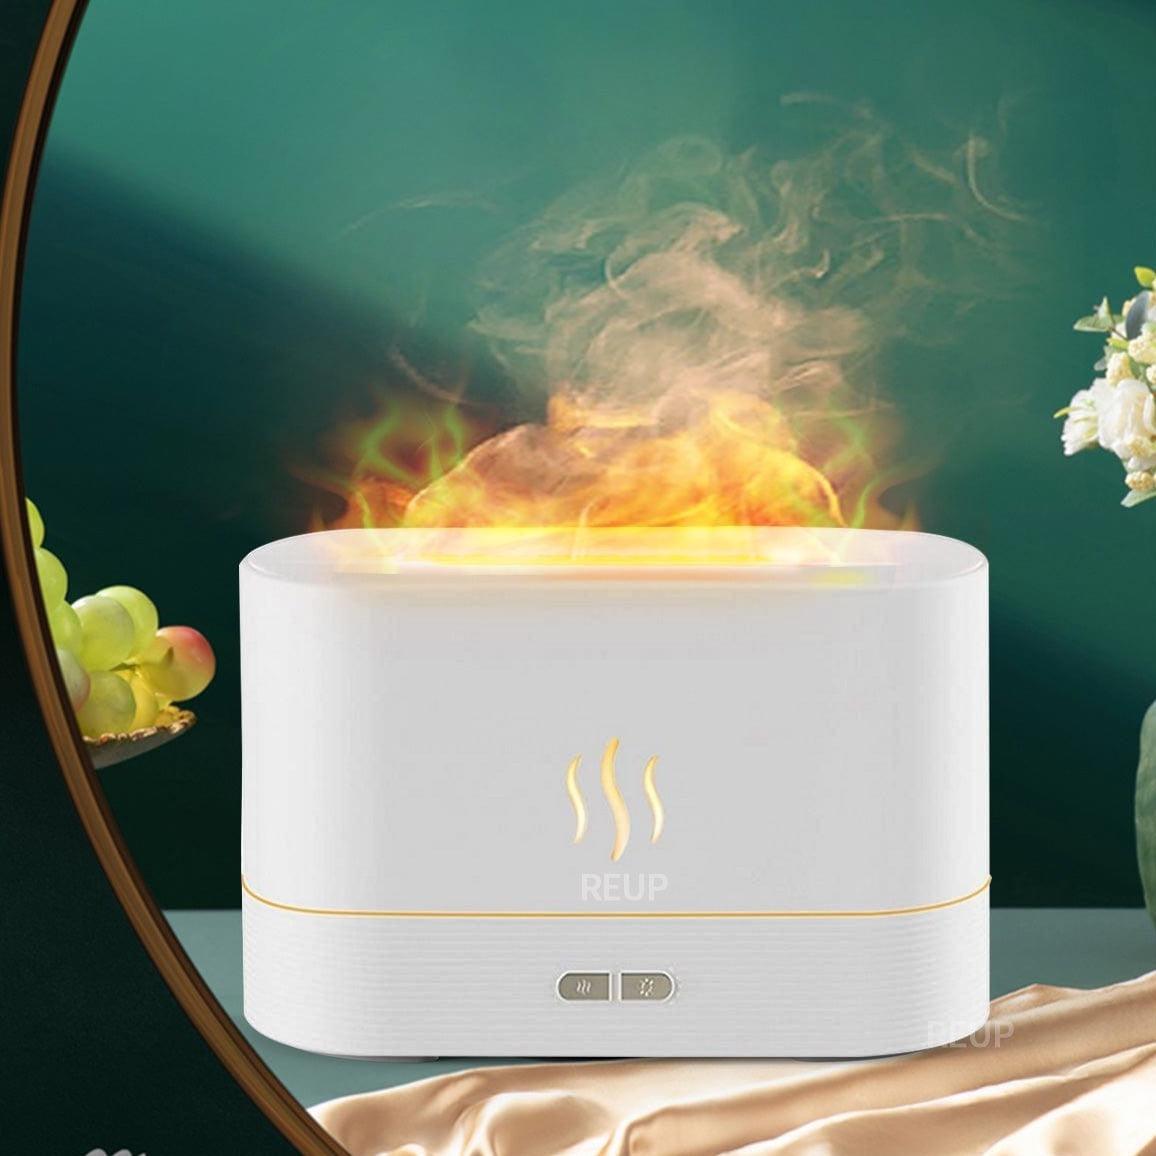 Shop 0 REUP Flame Aroma Diffuser Air Humidifier Ultrasonic Cool Mist Maker Fogger LED Essential Oil Jellyfish Difusor Fragrance Home Mademoiselle Home Decor